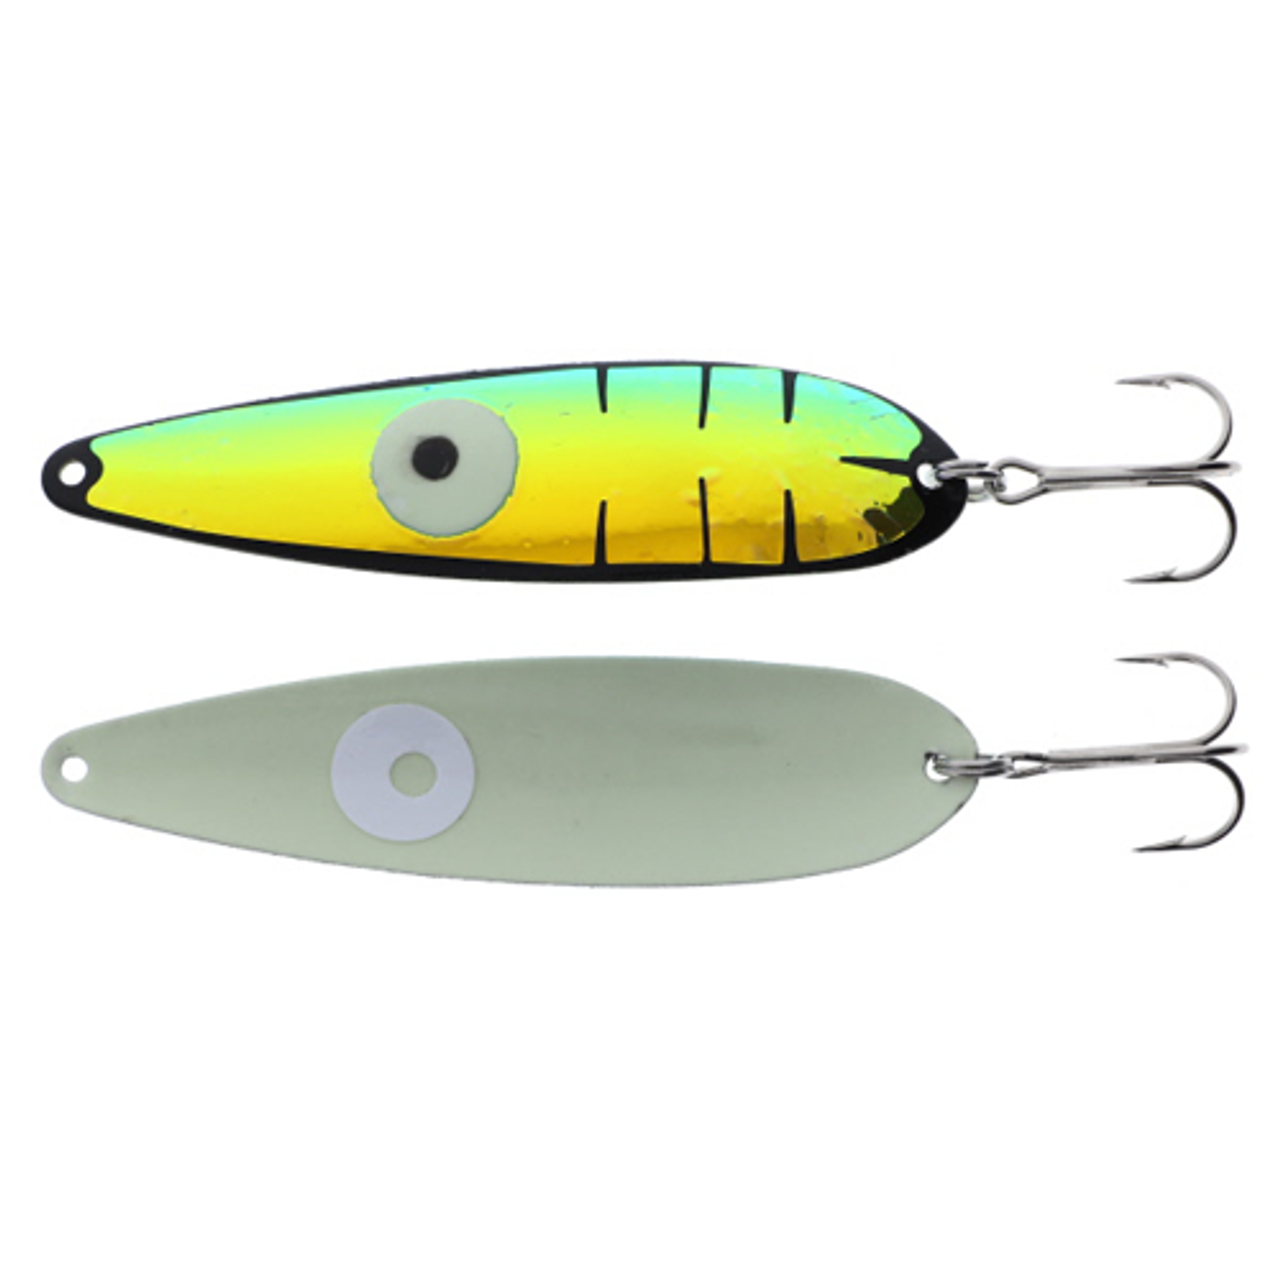 Triple S Sporting Supplies. Moonshine Lures